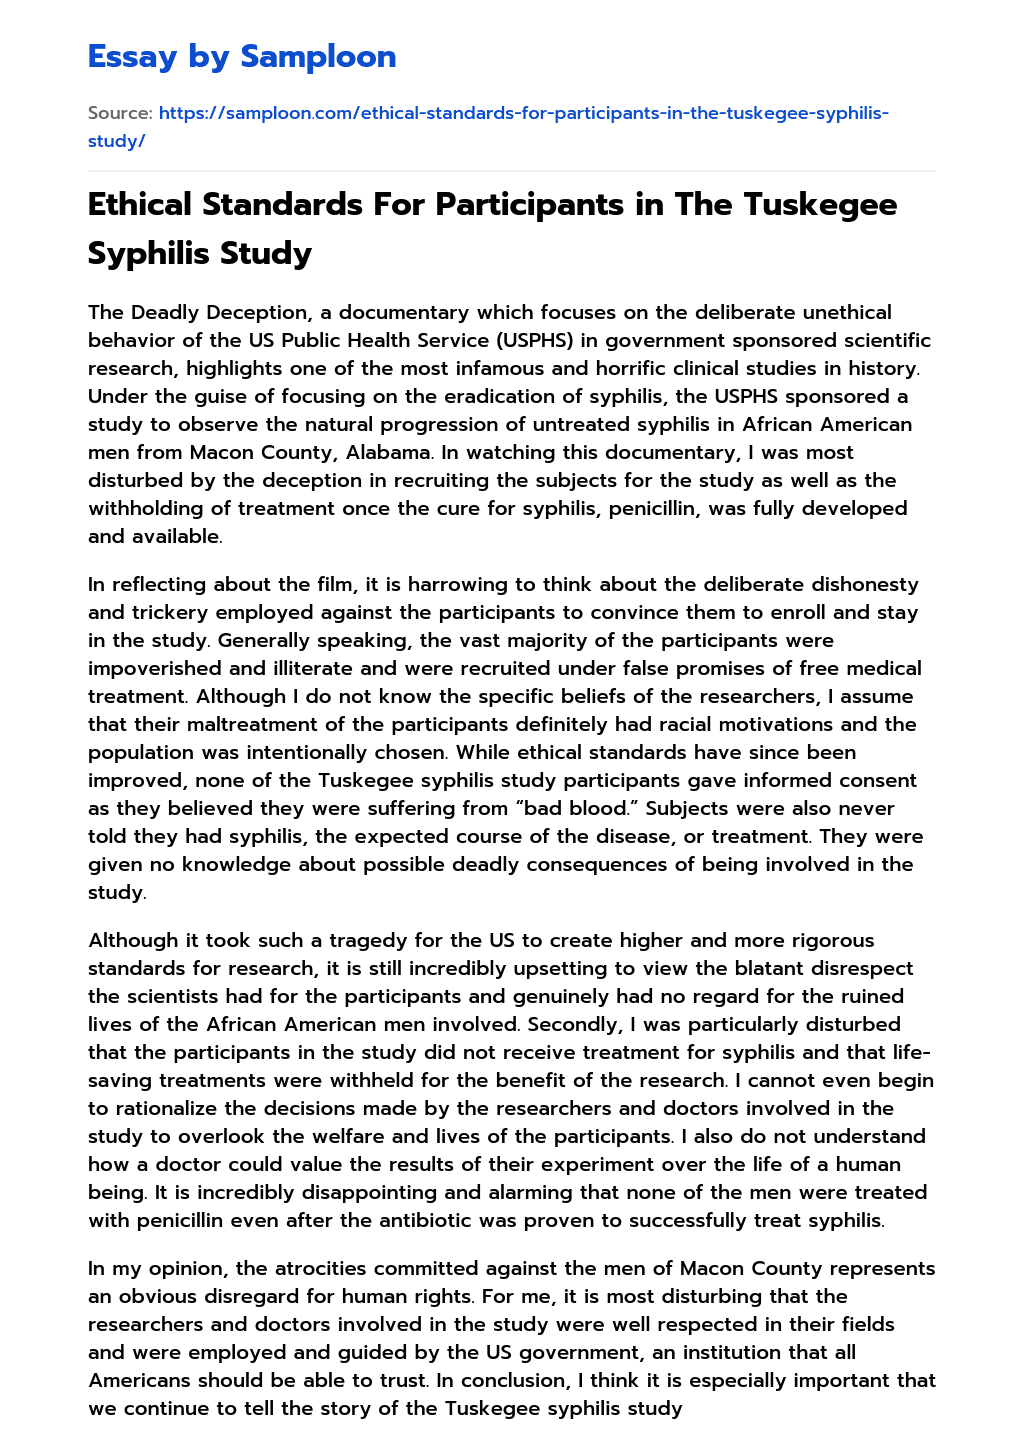 Ethical Standards For Participants in The Tuskegee Syphilis Study essay